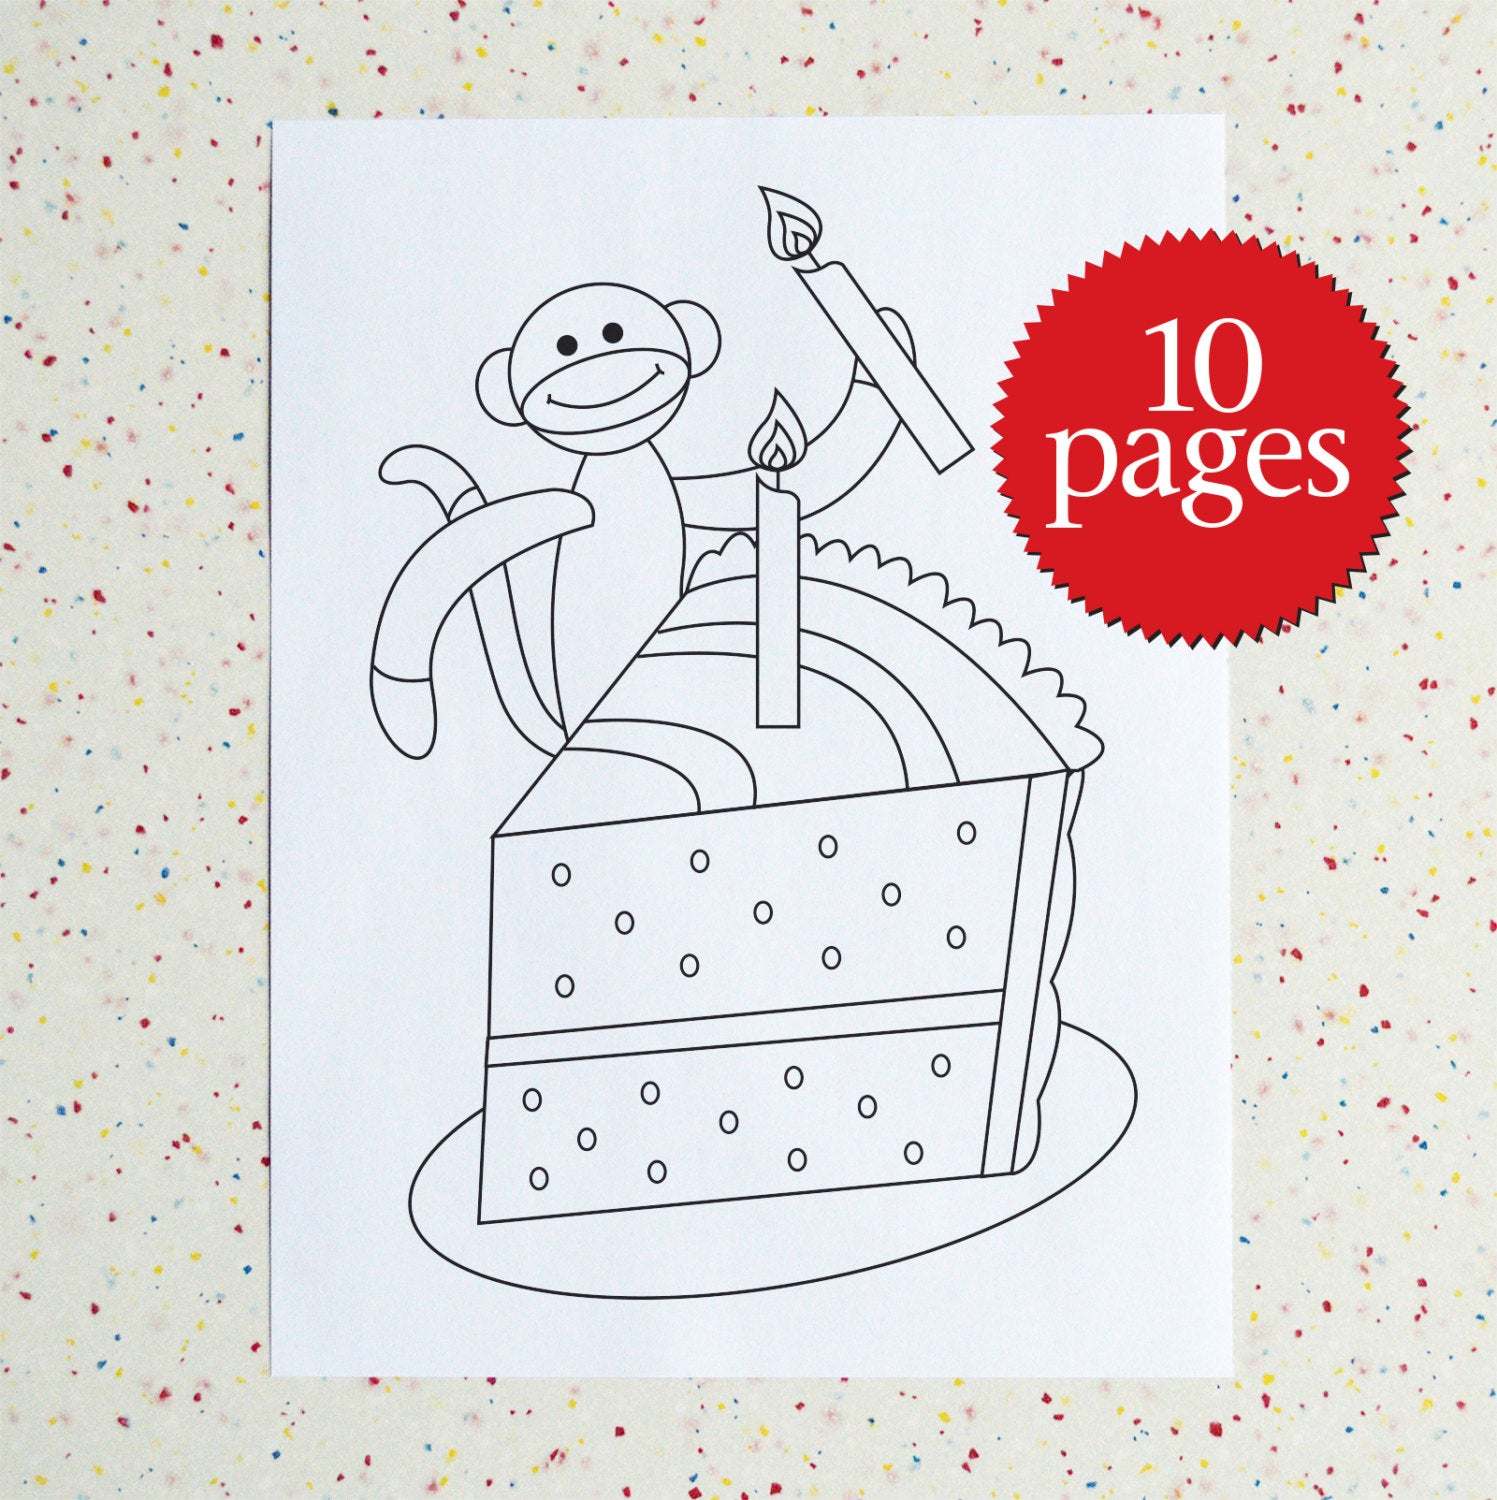 Sock Monkey Coloring Page Colouring Pages Birthday Sock Monkey Birthday Coloring Book Loot Bags Birthday Decorations Sock Monkeys